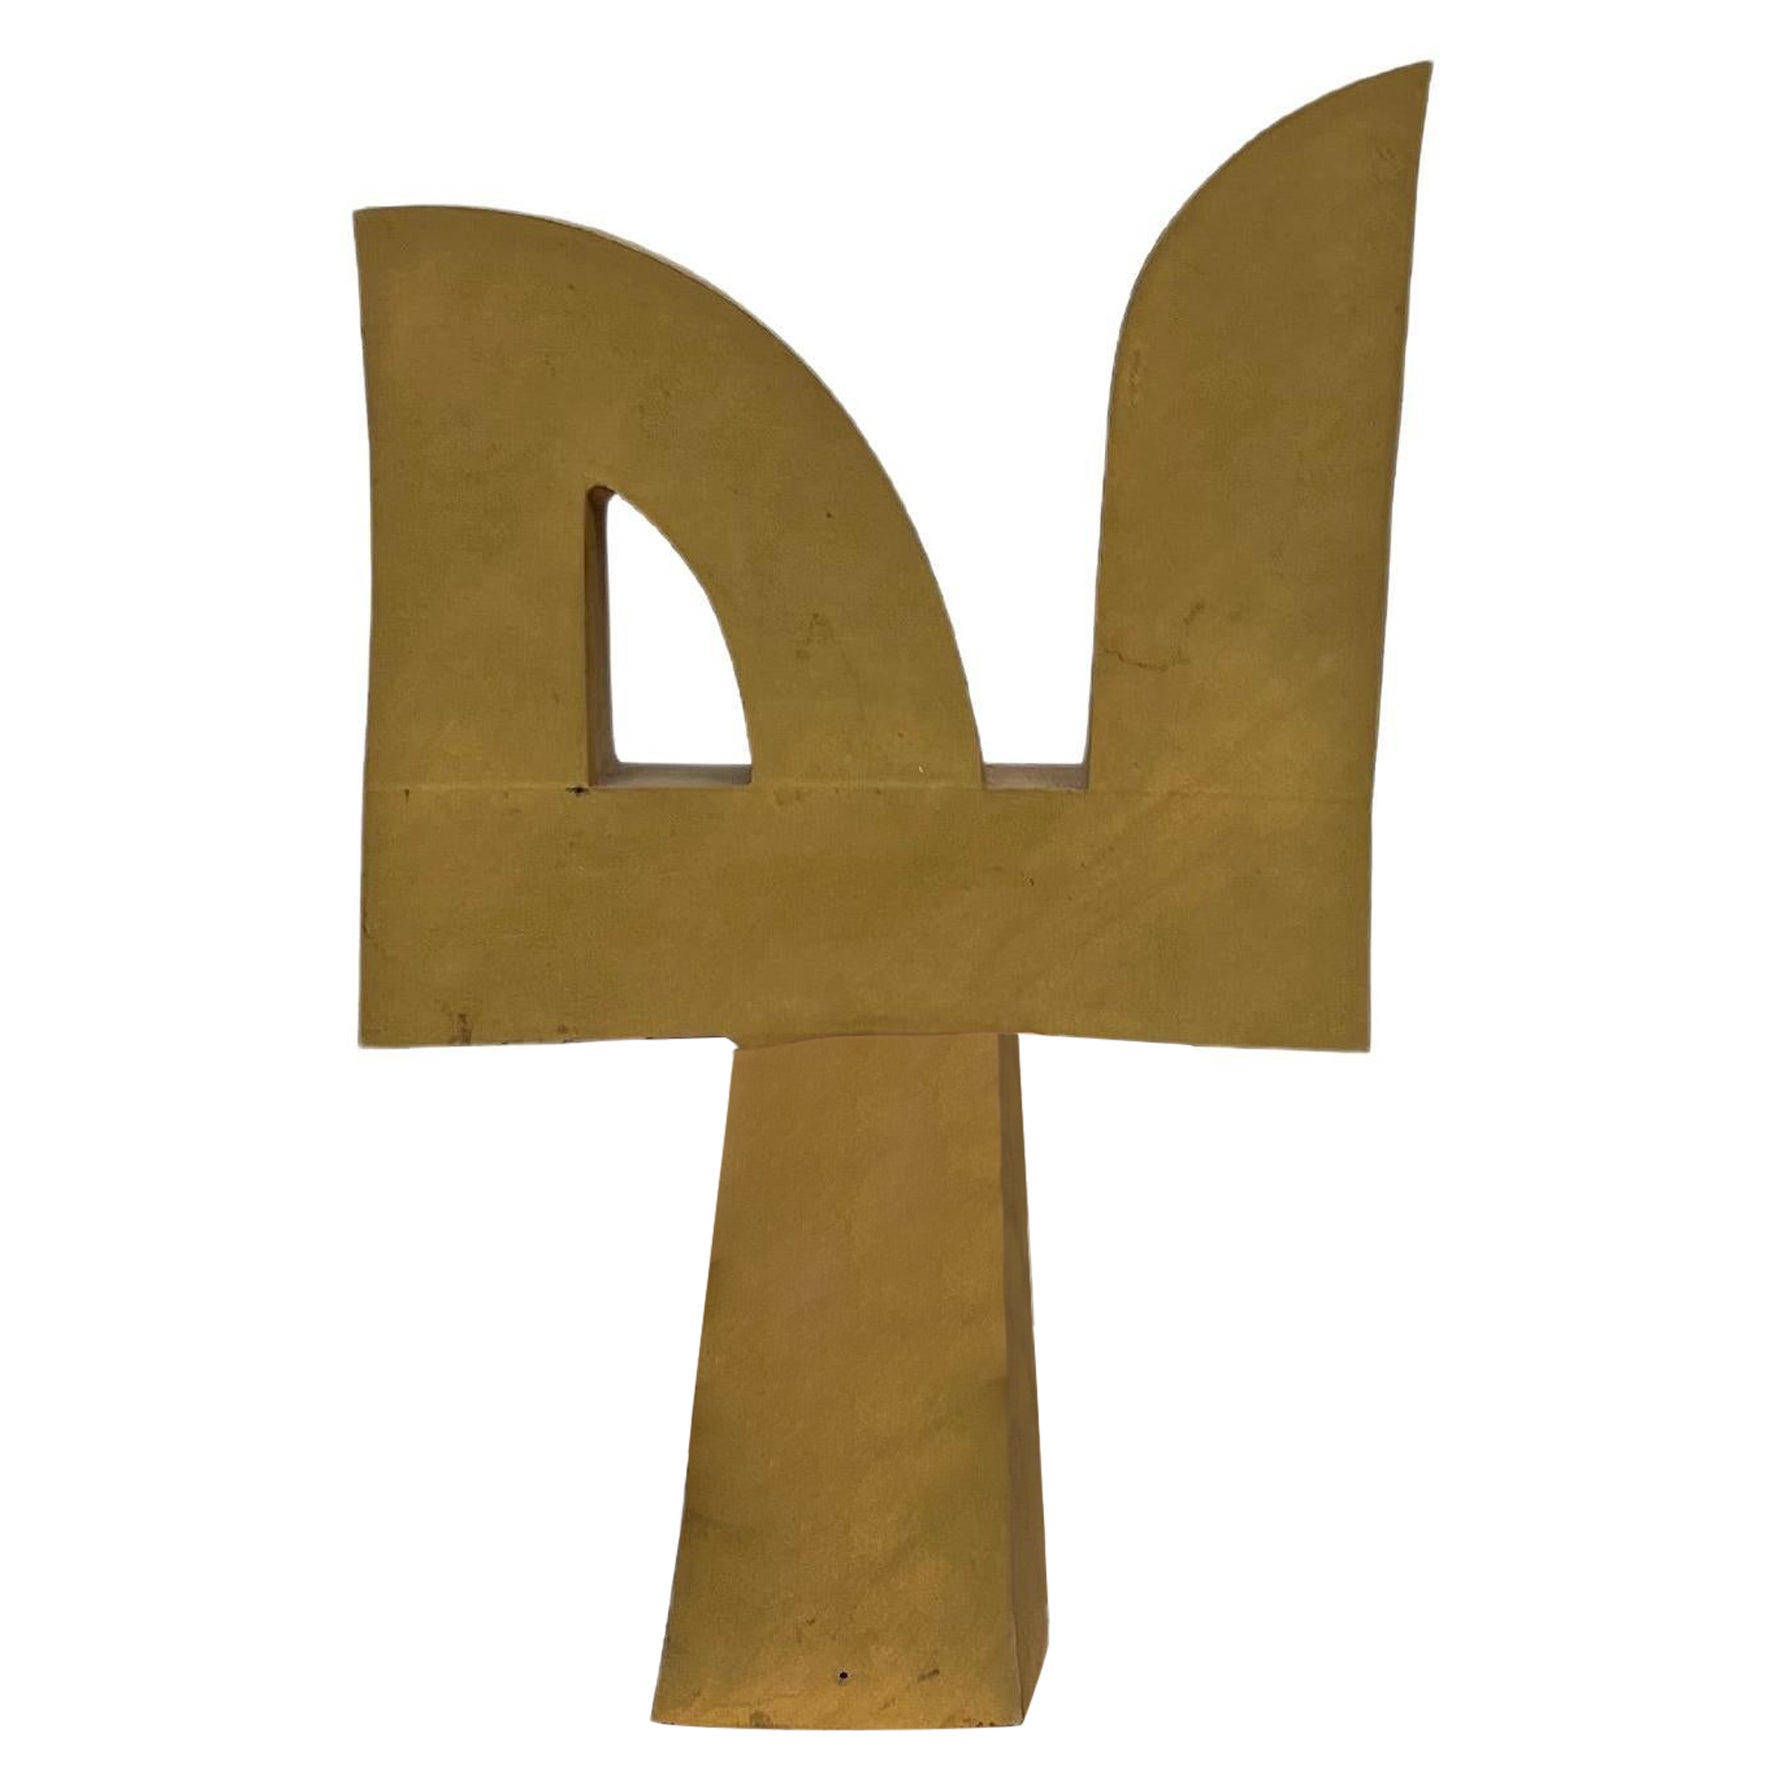 Vintage Abstract Gold Sculpture, c. 1981